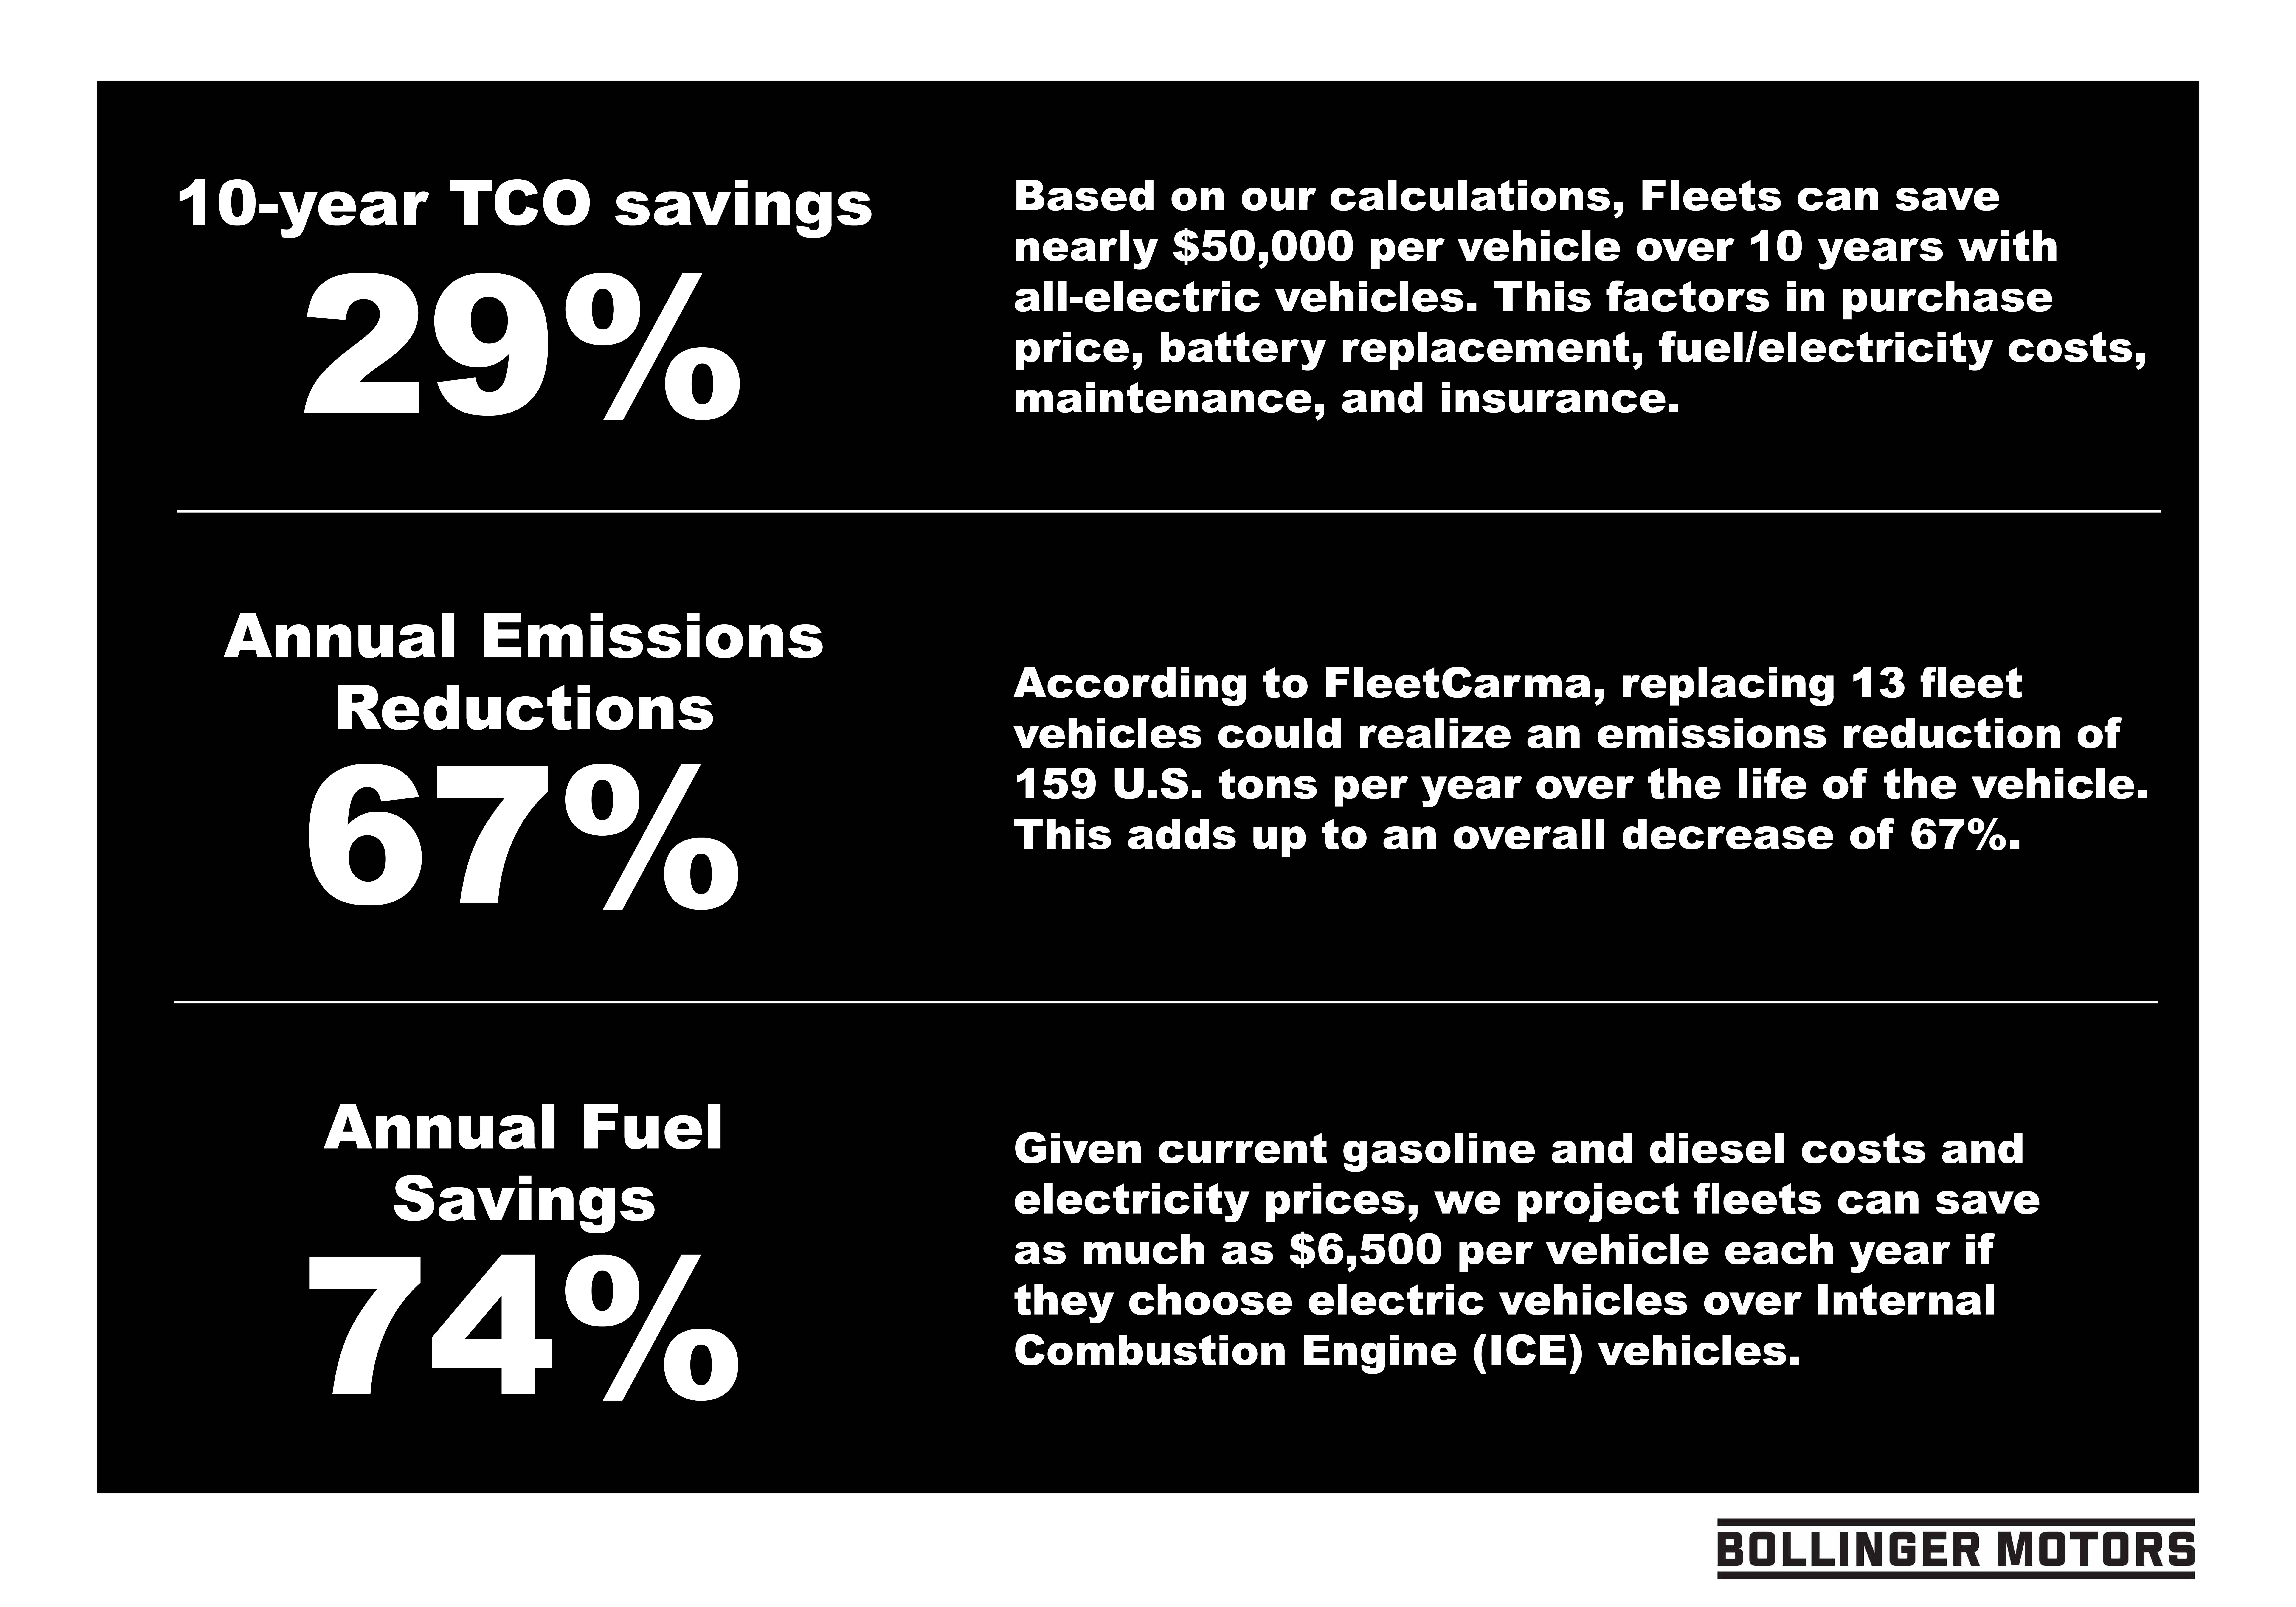 29% savings in Total Cost of Ownership over 10 years, and 74% annual fuel savings